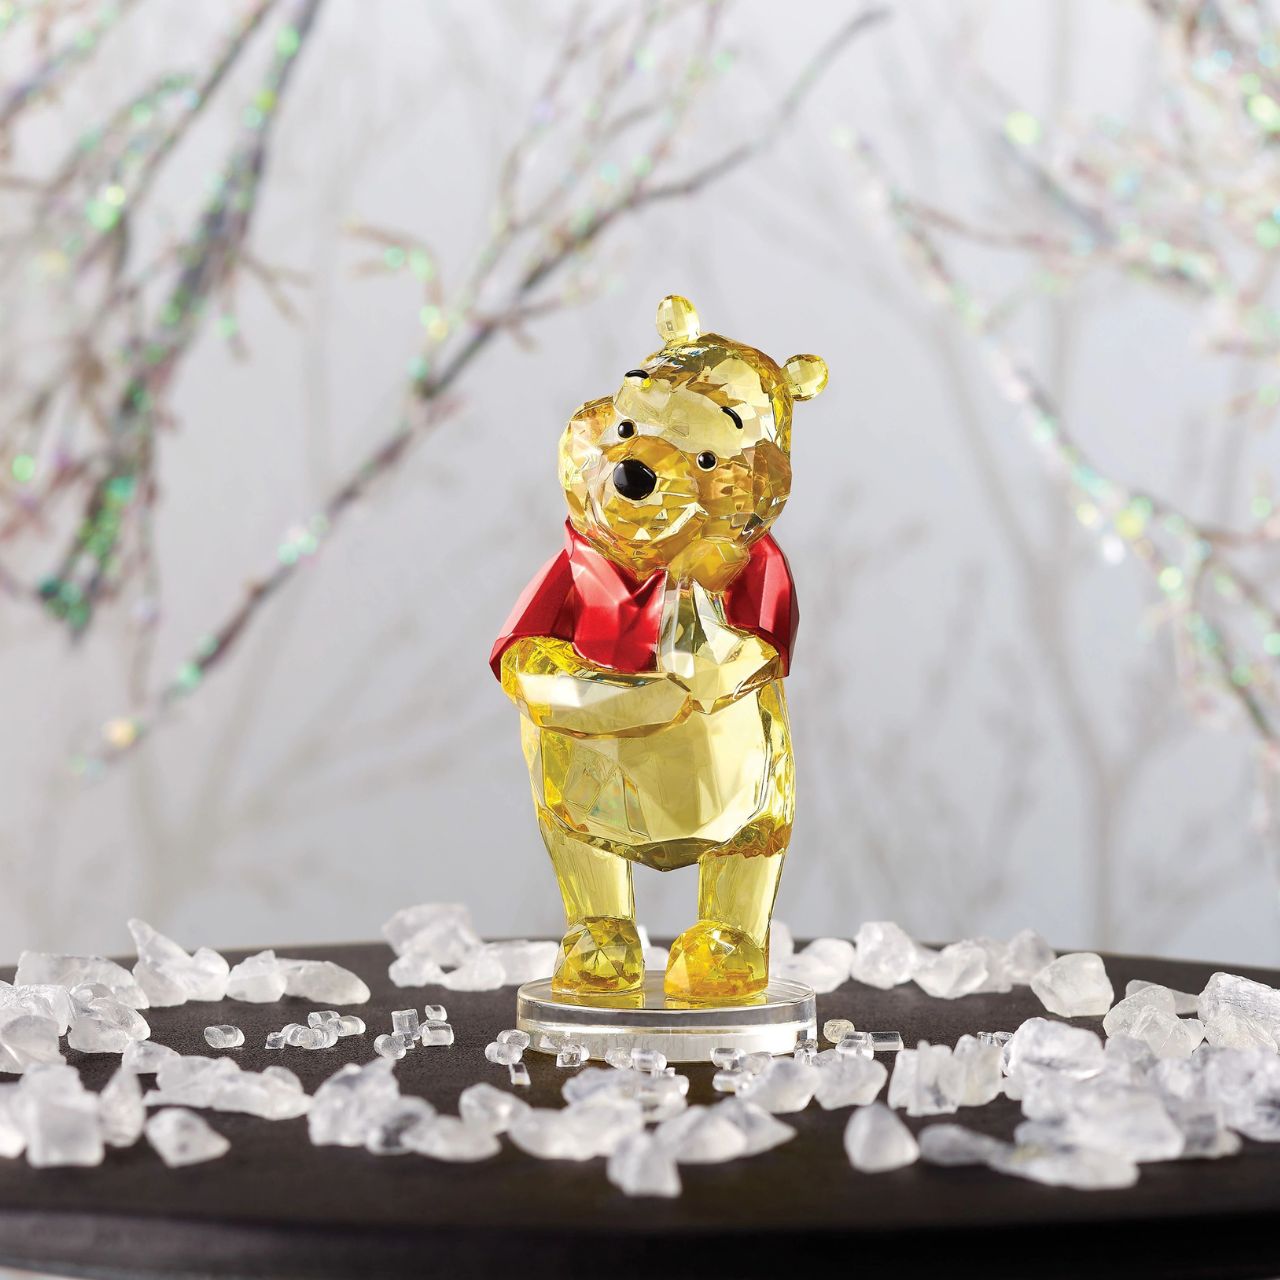 Disney Winnie The Pooh Facets Figurine  This "gem cut" acrylic sculpture reflects Winnie the Pooh's honey-sweet charm and whimsical personality. Presented in a branded window gift box. Not a toy or childrens product. Intended for adults only.